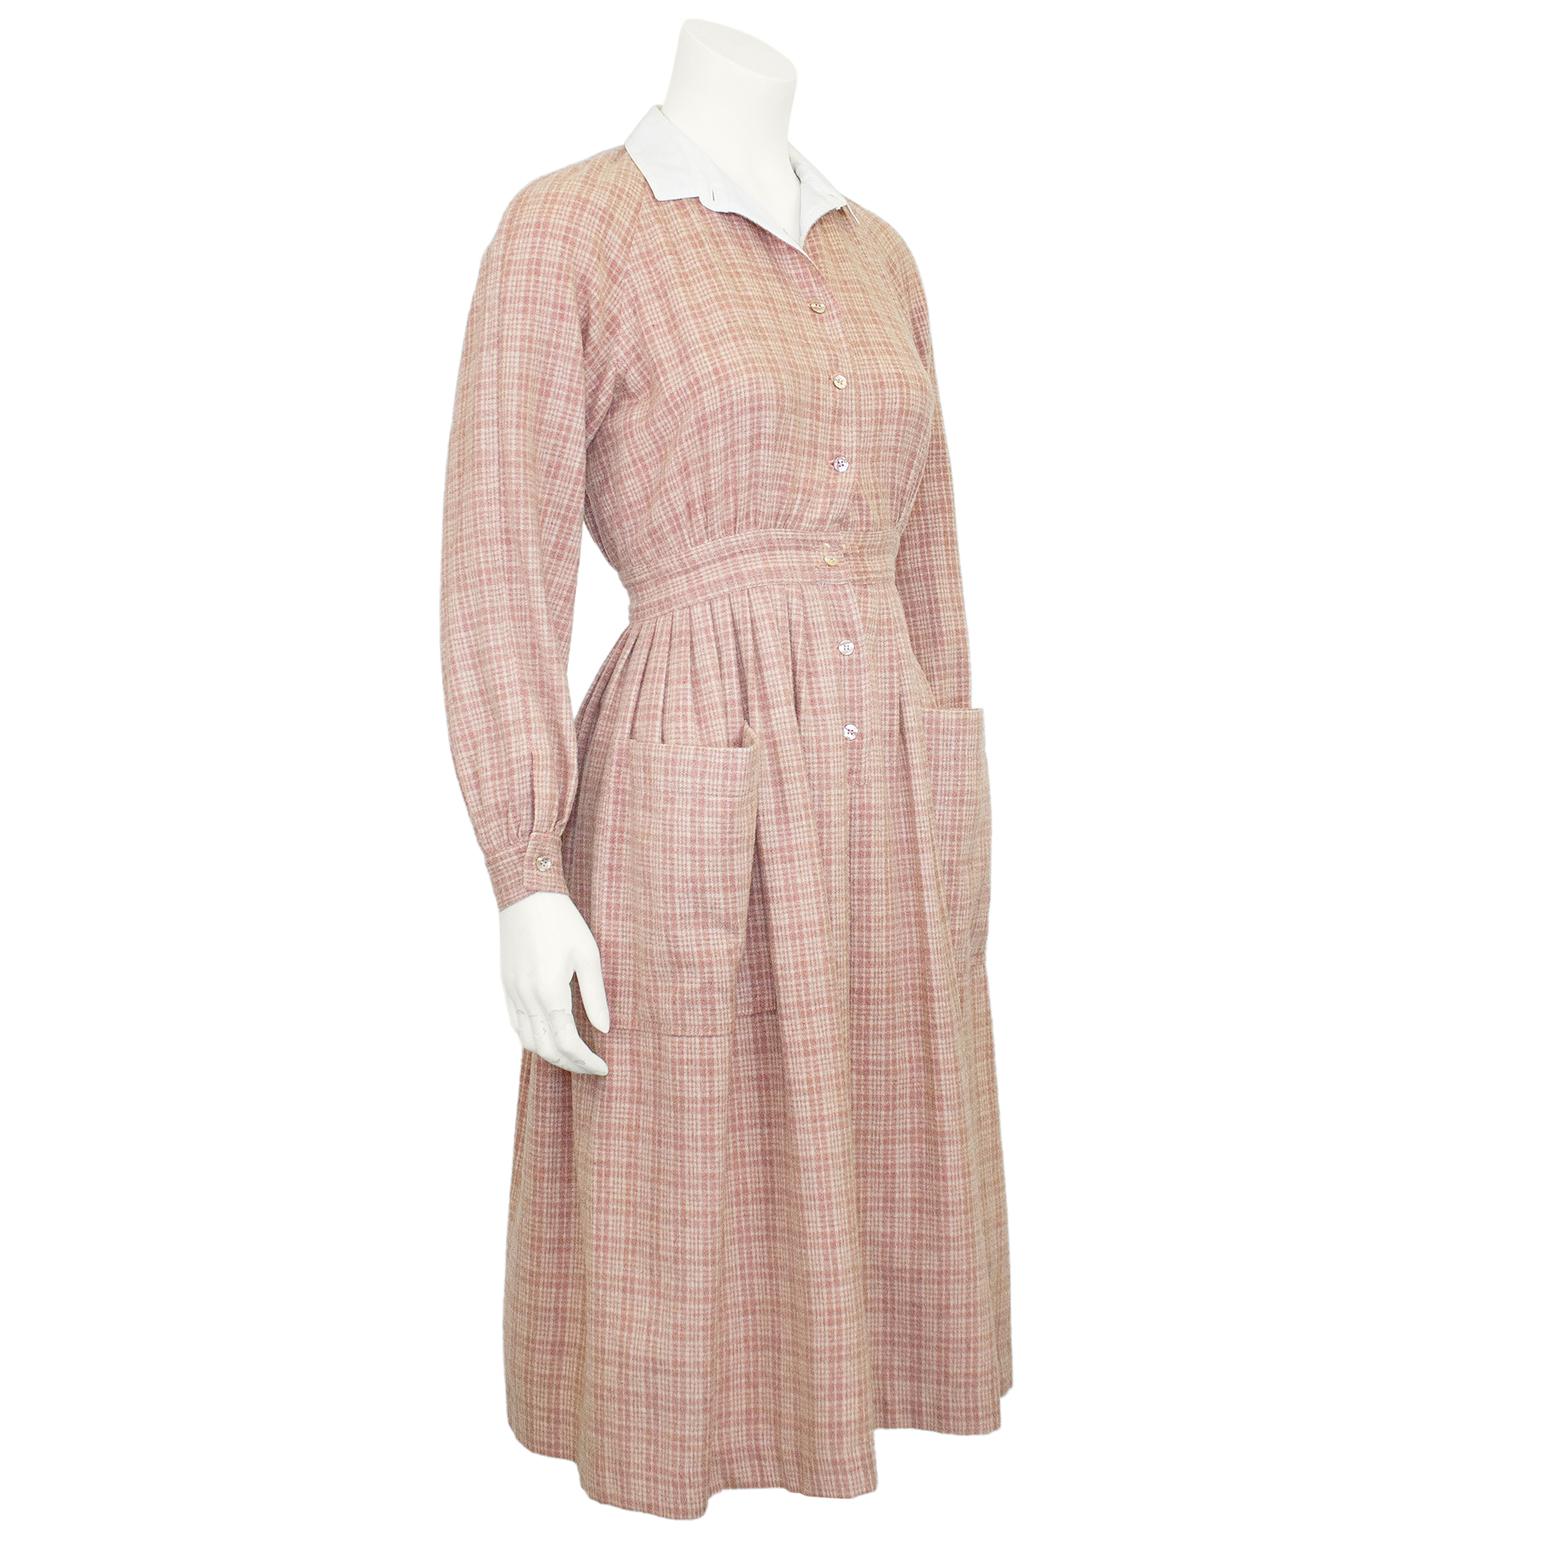 Vintage Fiorucci pink wool plaid shirt dress with white cotton collar. Fiorucci was the hottest new brand in London in the early 12970's, following in the footsteps of Biba where affordable fashion was in full swing. Subtle pink and off white plaid